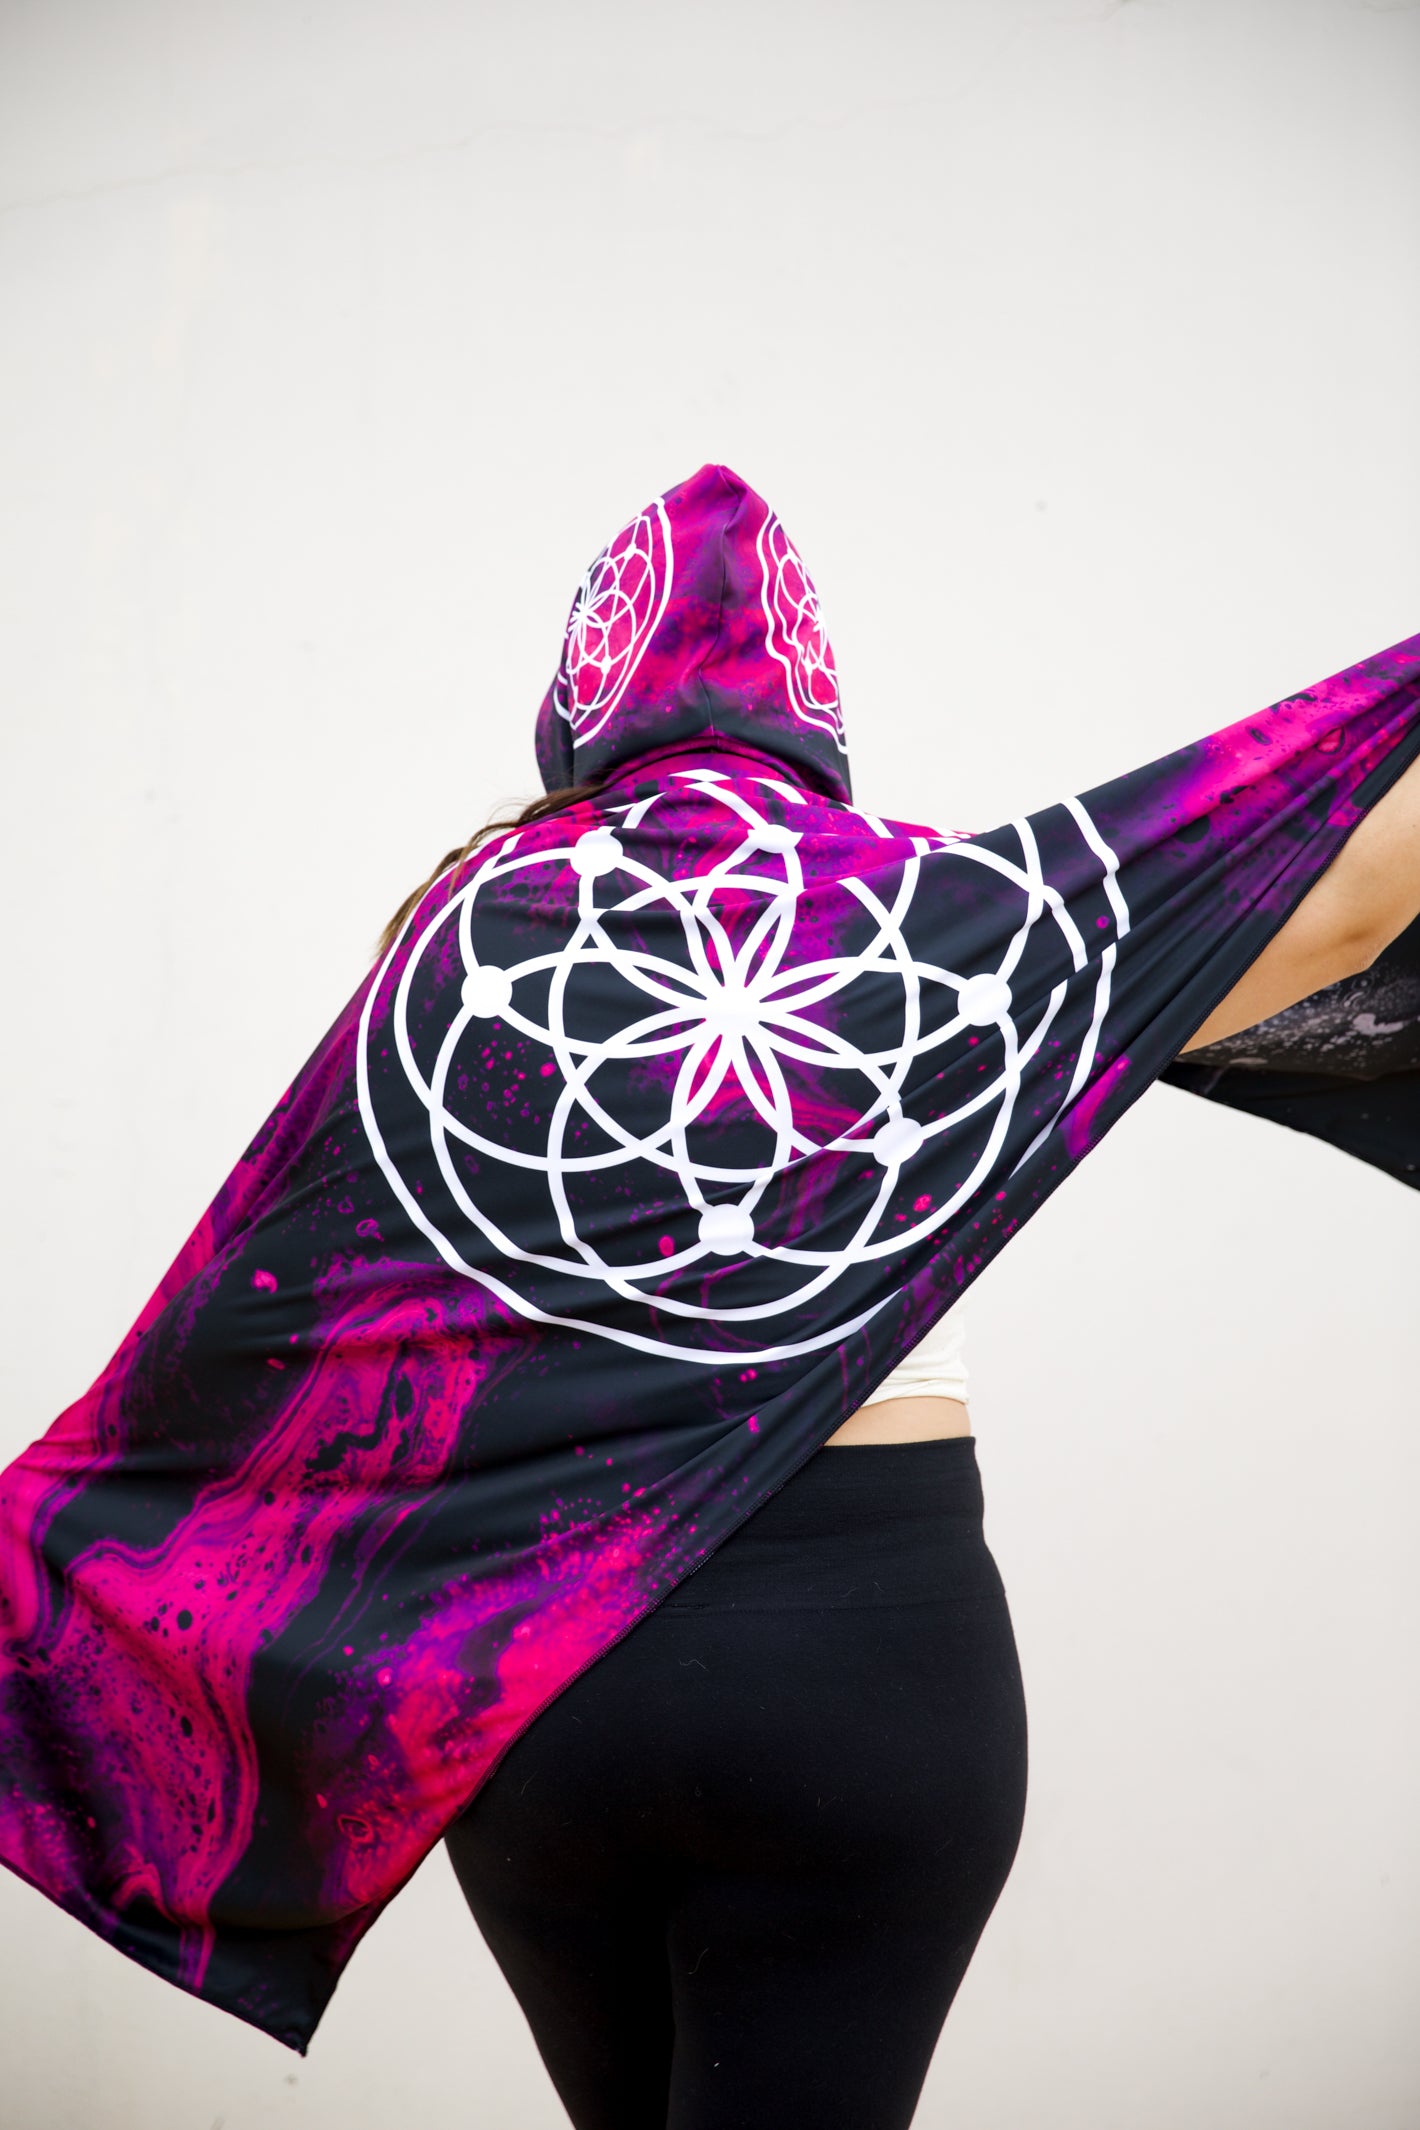 What do guys wear to  raves? Freedom Rave Wear's Toxic hooded scarf.